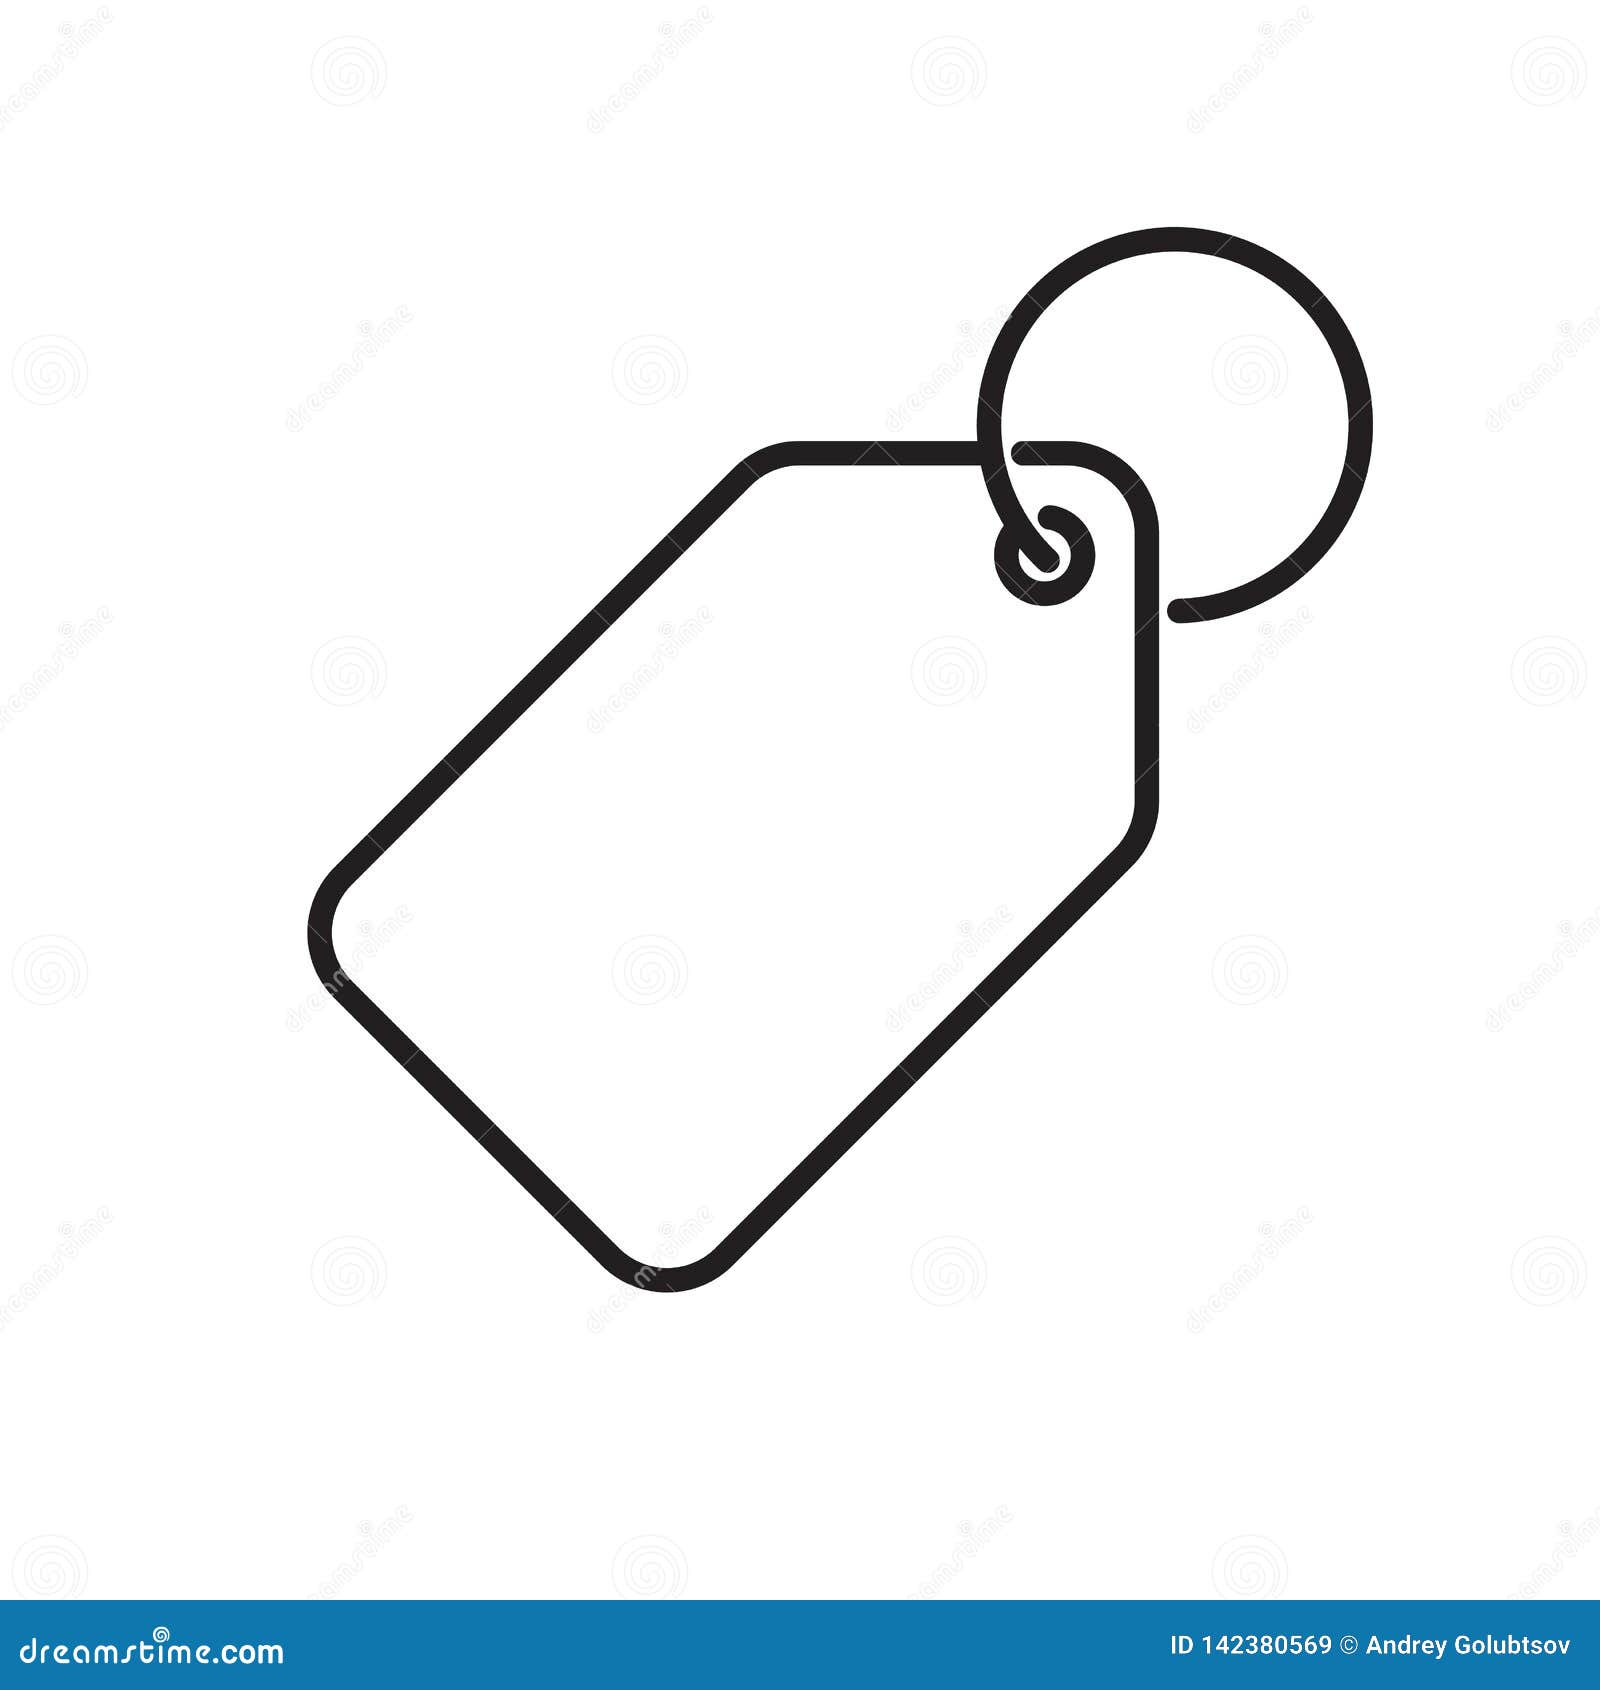 https://thumbs.dreamstime.com/z/price-tag-vector-icon-label-pricetag-ring-luggage-keychain-symbol-142380569.jpg